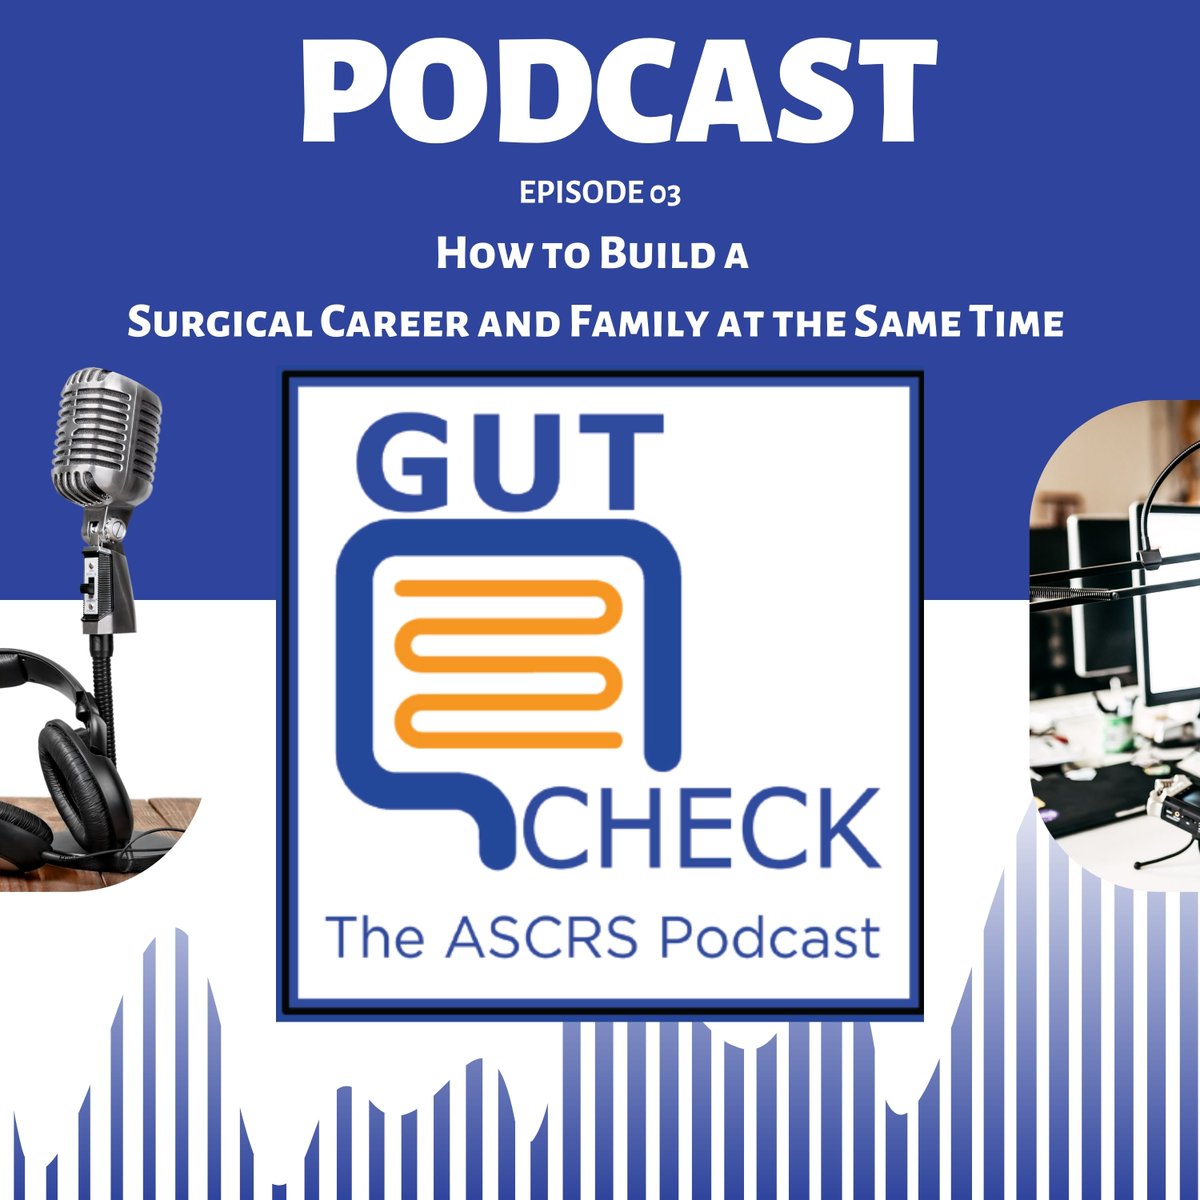 Join @Averywalker21 @BiddyDas @EKing719 @jabelsonmd for personal stories, and ideas on how to build a surgical career and family at the same time. Listen now at: gutcheckpodcast.org